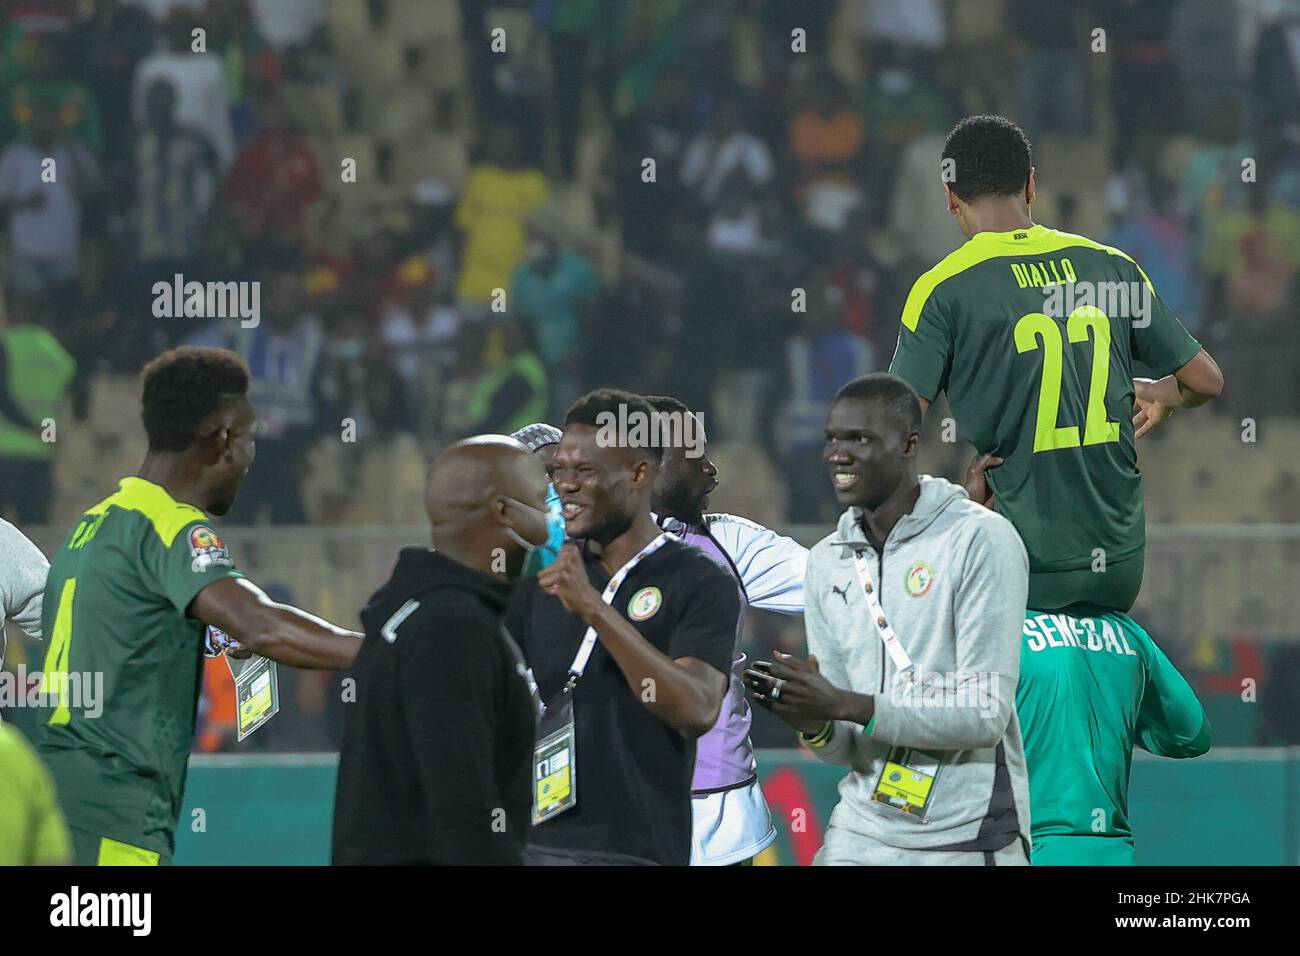 CAMEROON, Yaounde, 02 February 2022 - Abdou Diallo of Senegal during the Africa Cup of Nations play offs semi final match between Burkina Faso and Senegal at Stade Ahmadou Ahidjo,Yaounde, Cameroon, 02/02/2022/ Photo by SF Stock Photo